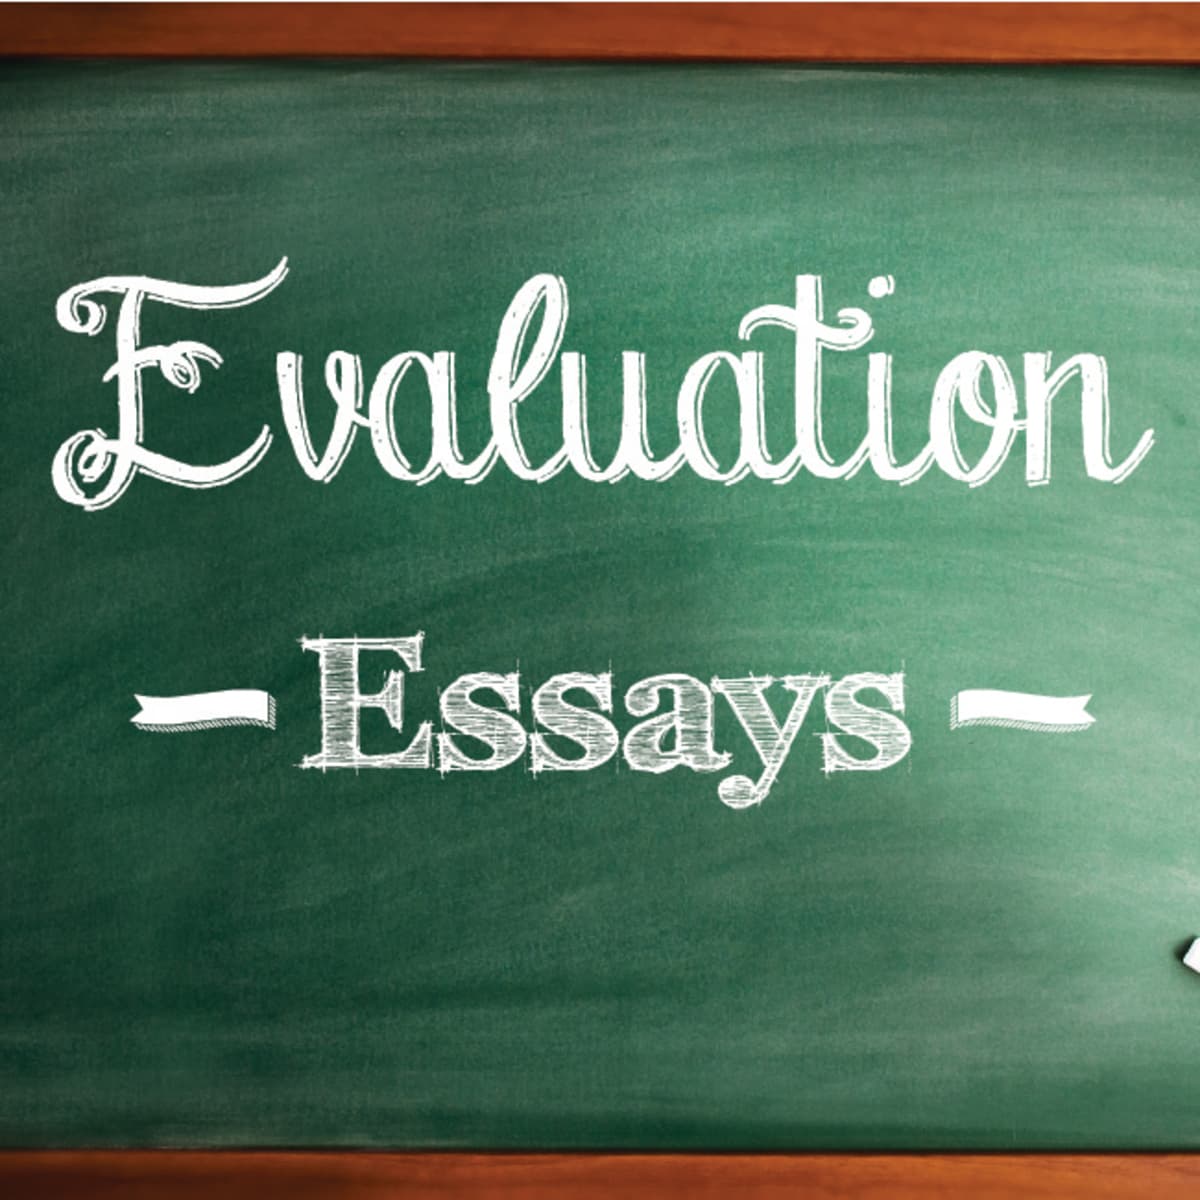 review essay topic ideas